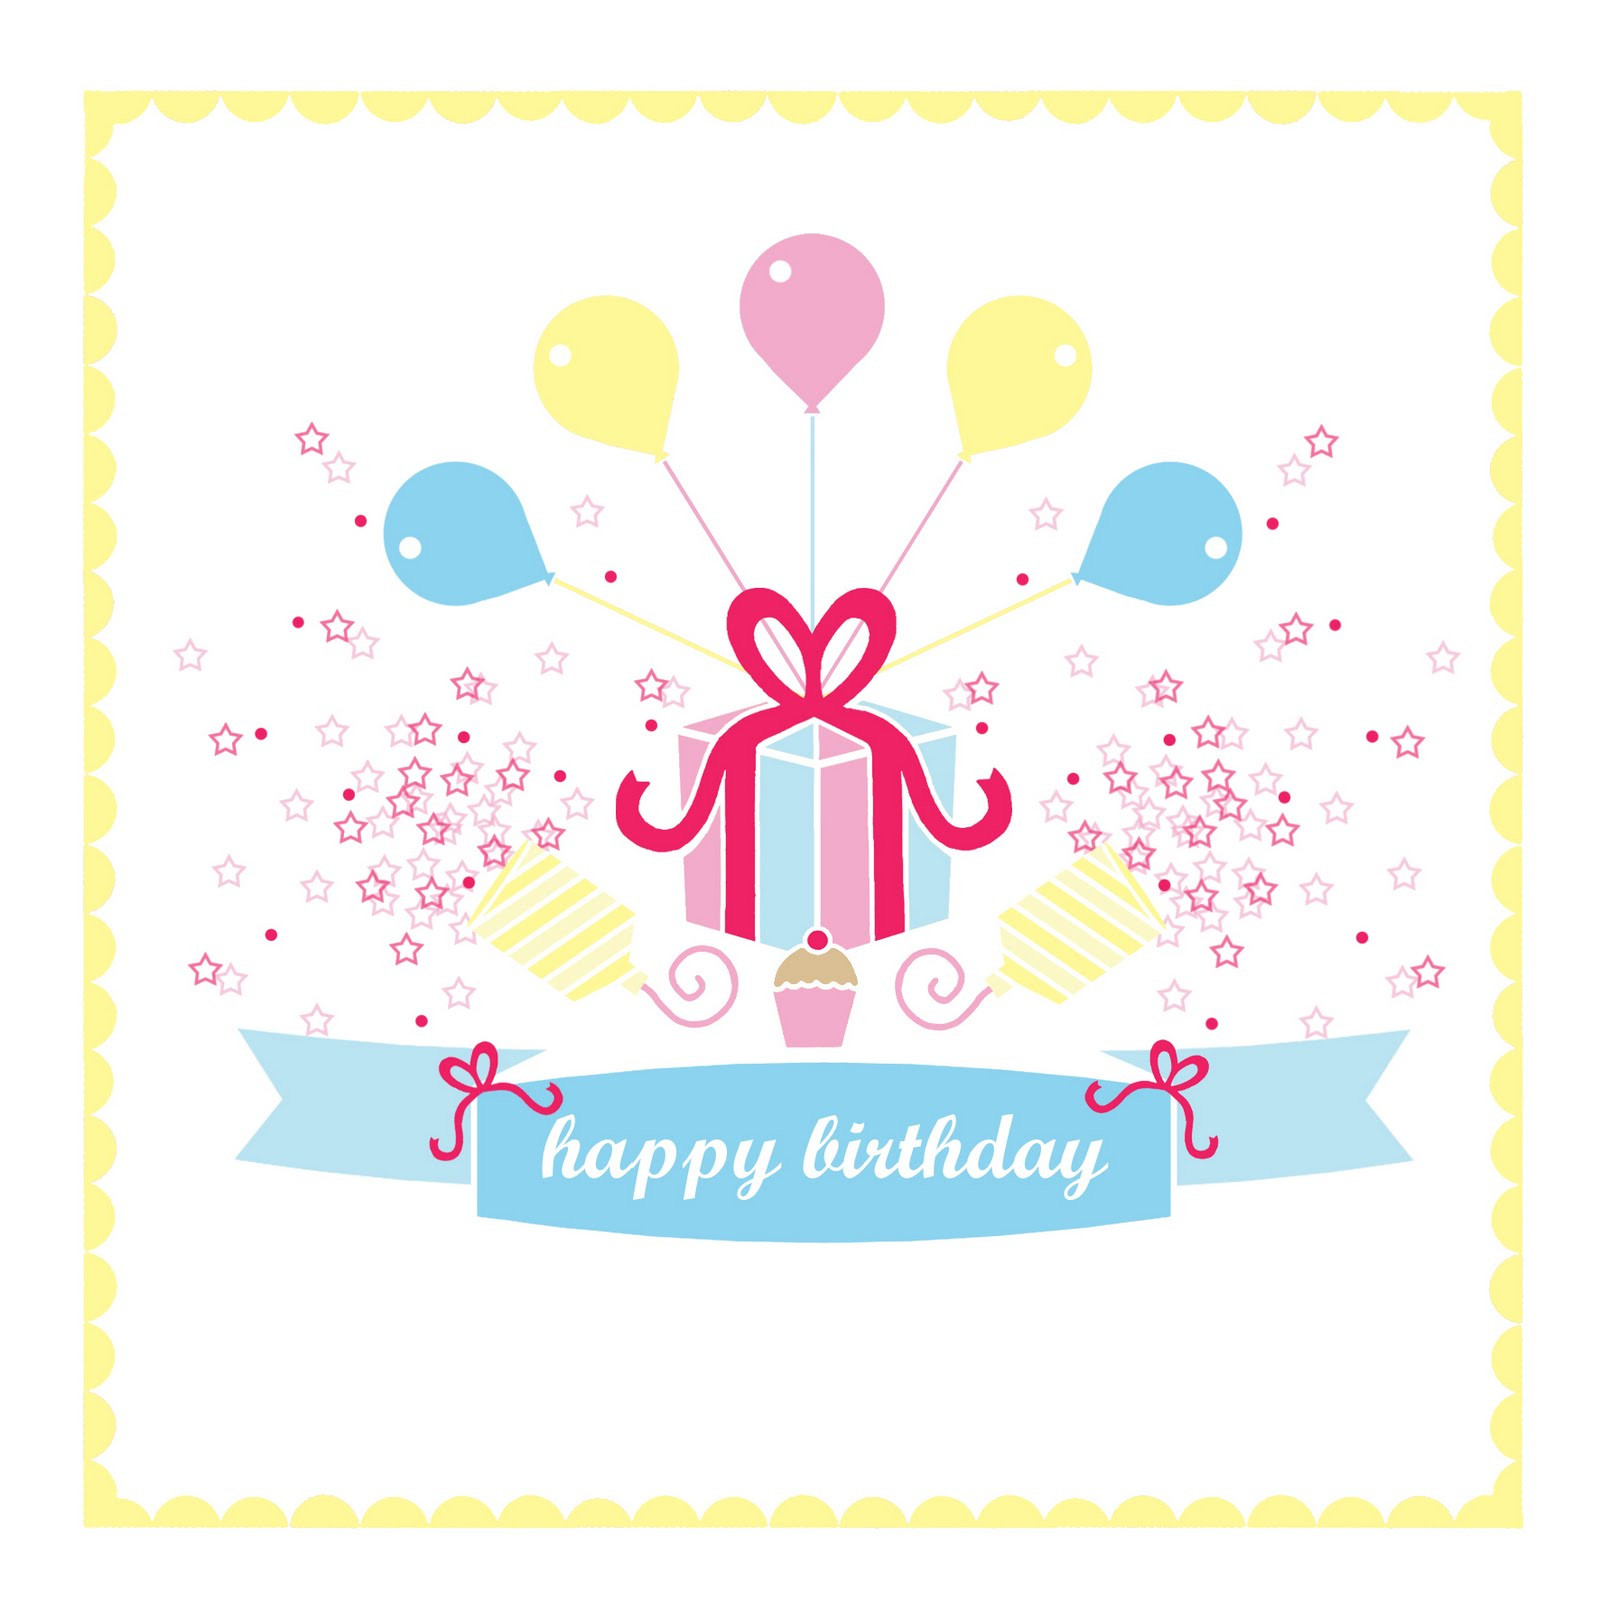 Best ideas about Birthday Card Design
. Save or Pin littletree designs new birthday cards Now.